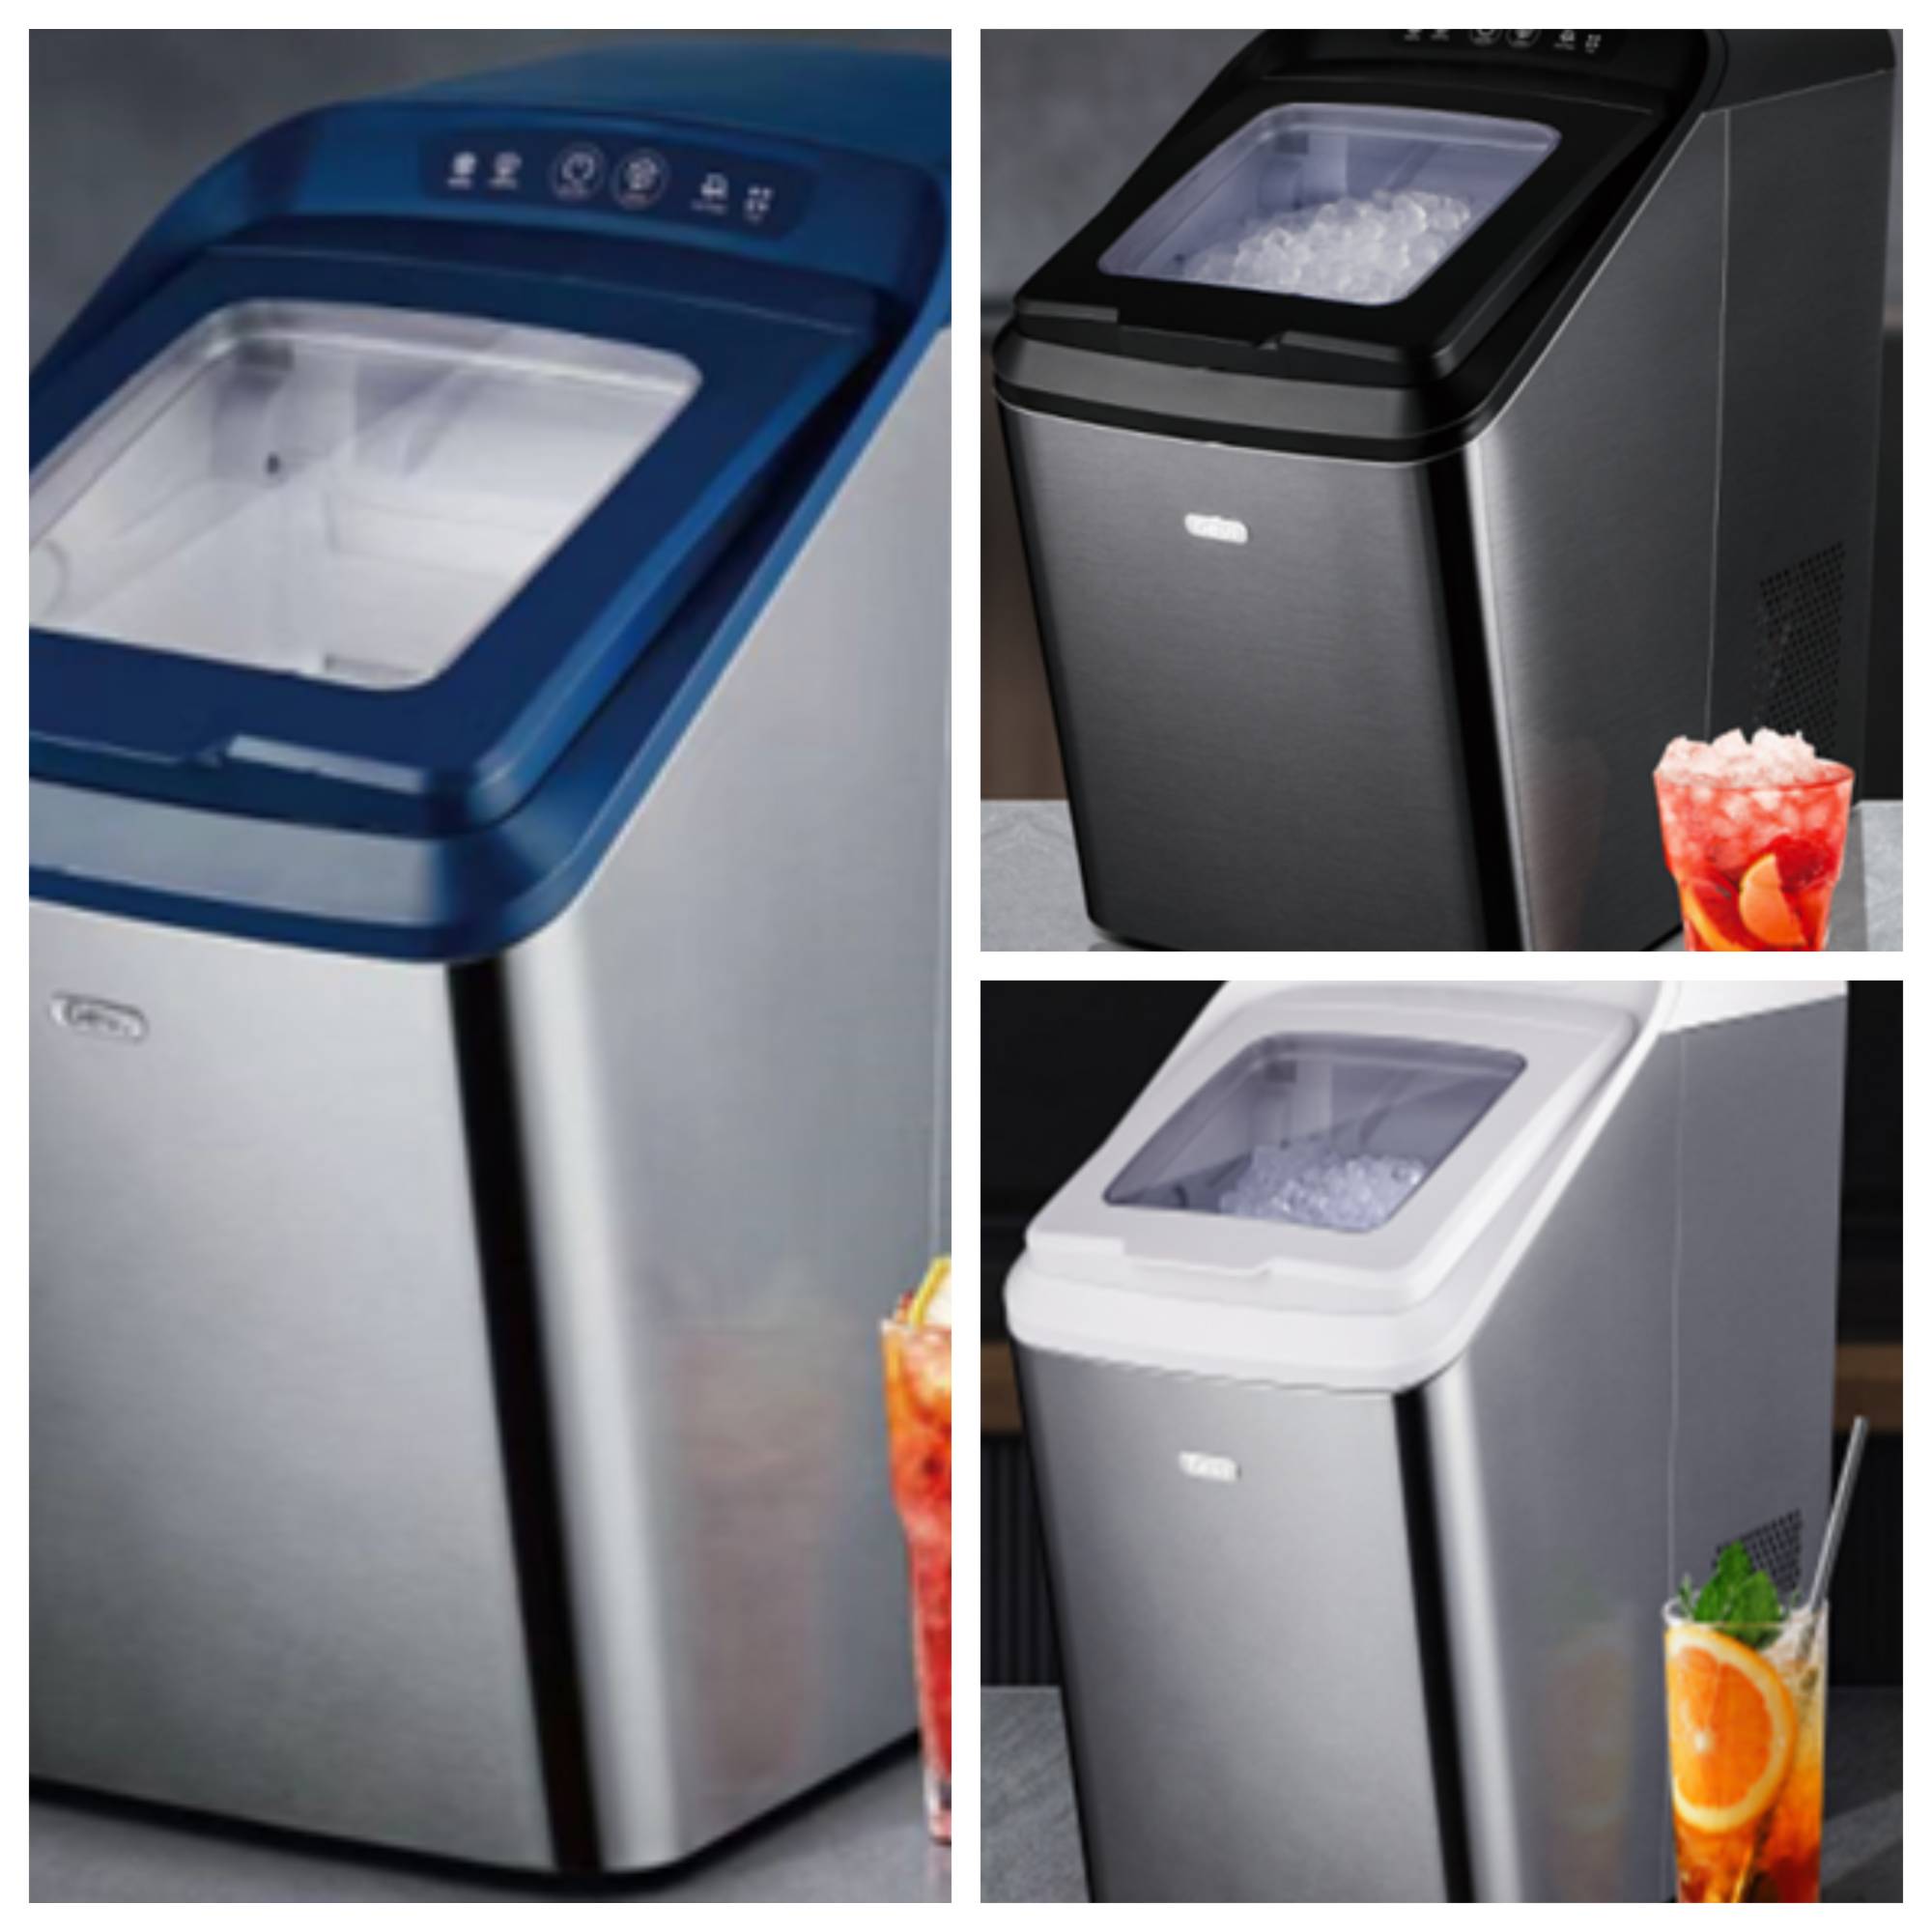 Popular nugget ice maker recalled for laceration hazard – NBC New York